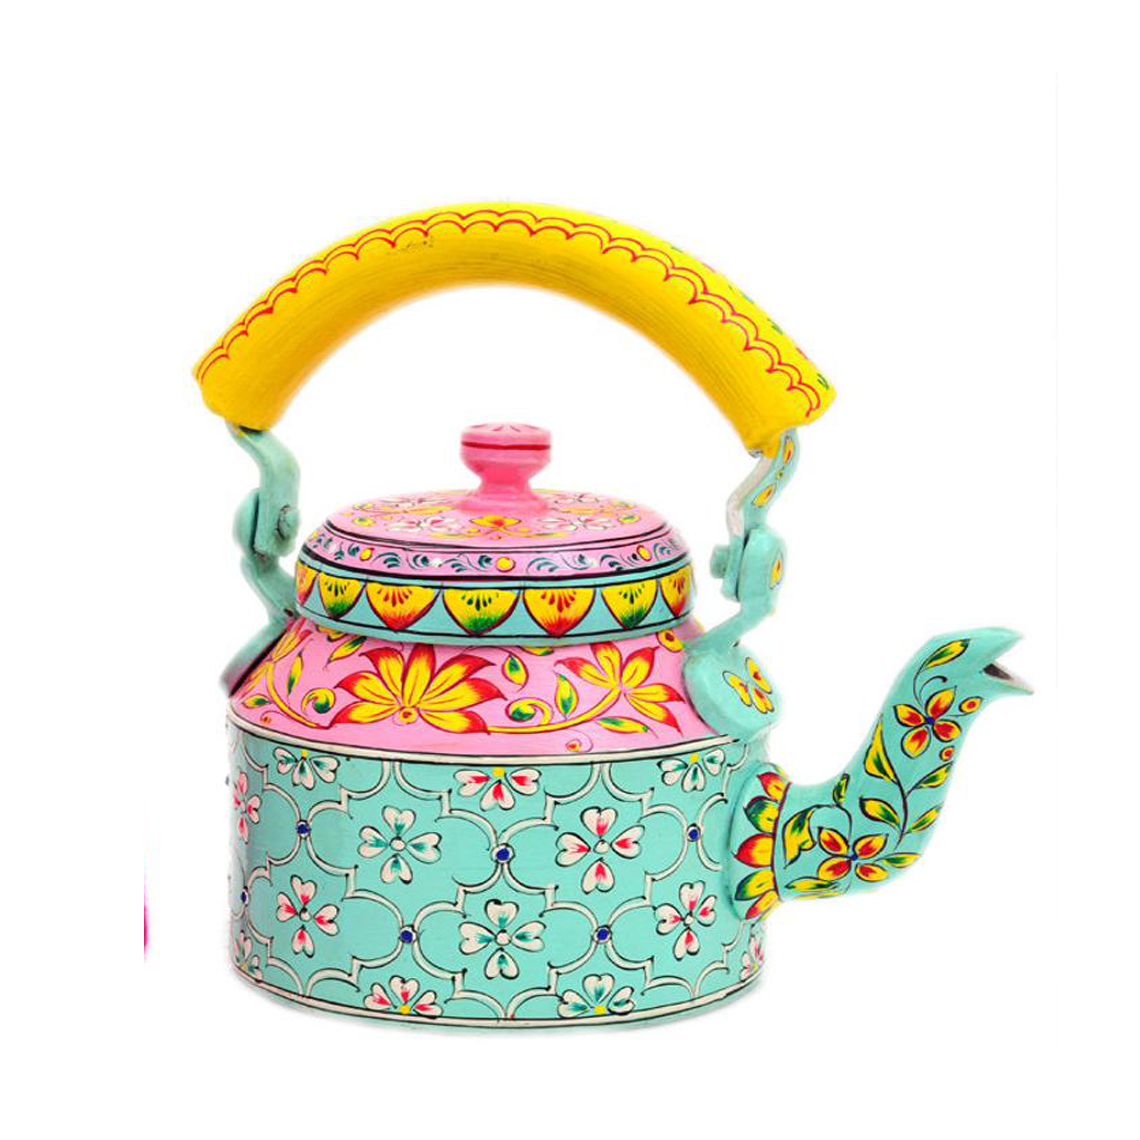 Antique Hand painted tea kettle Interior Design : SKY  Chai Kettle, Traditional Indian tea kettle, Tea brewer, Gift for tea lovers